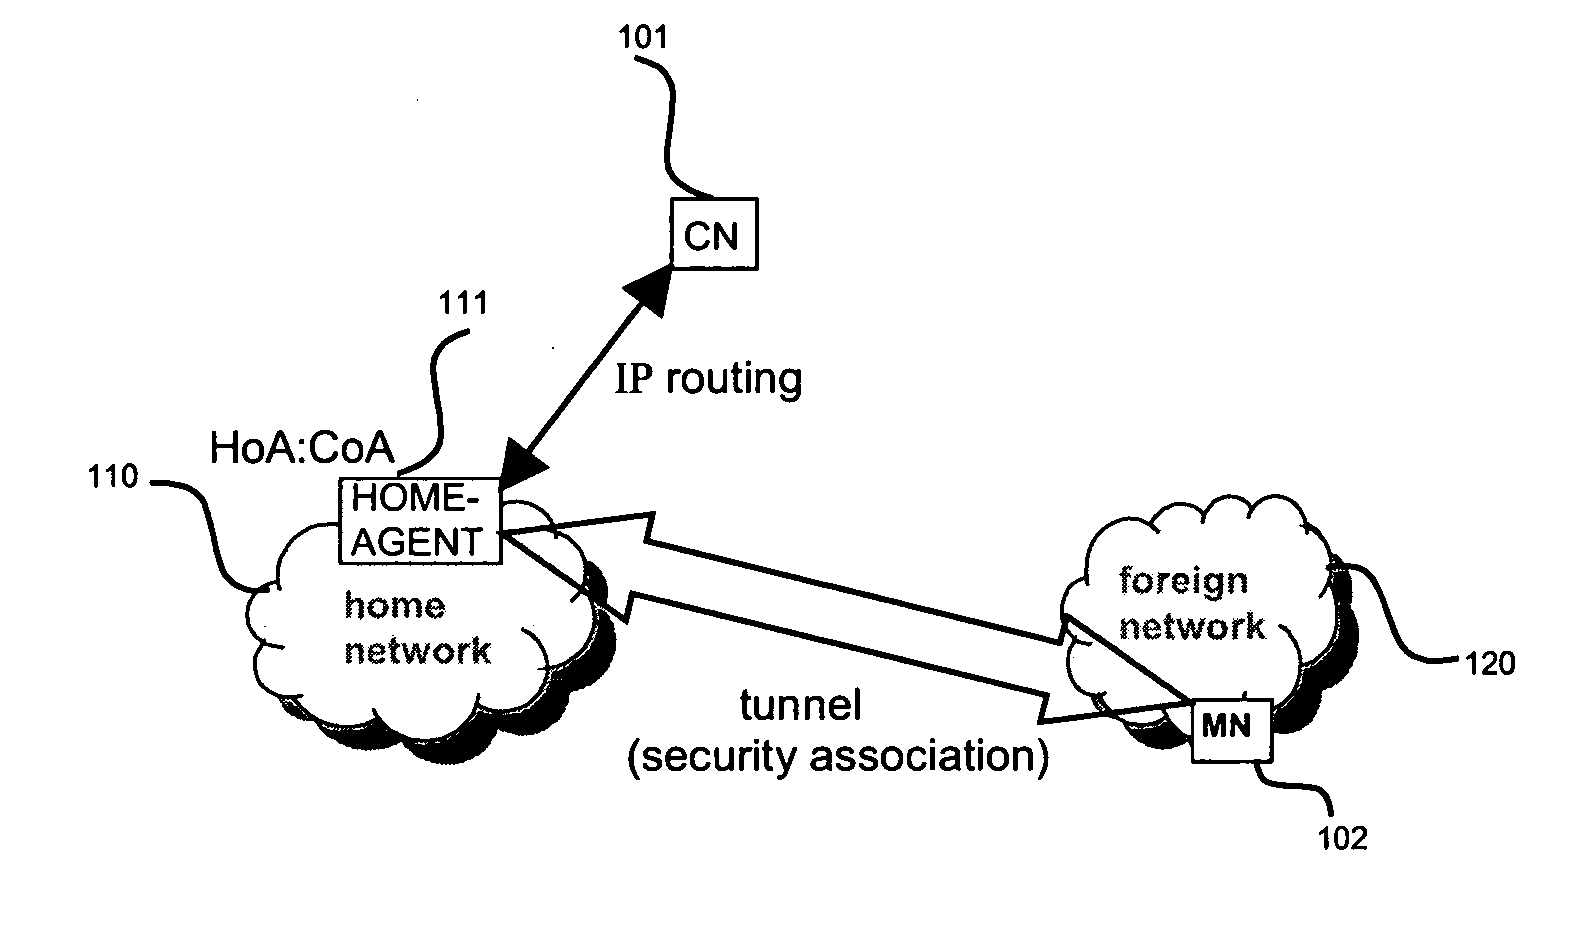 Route optimization of a data path between communicating nodes using a route optimization agent